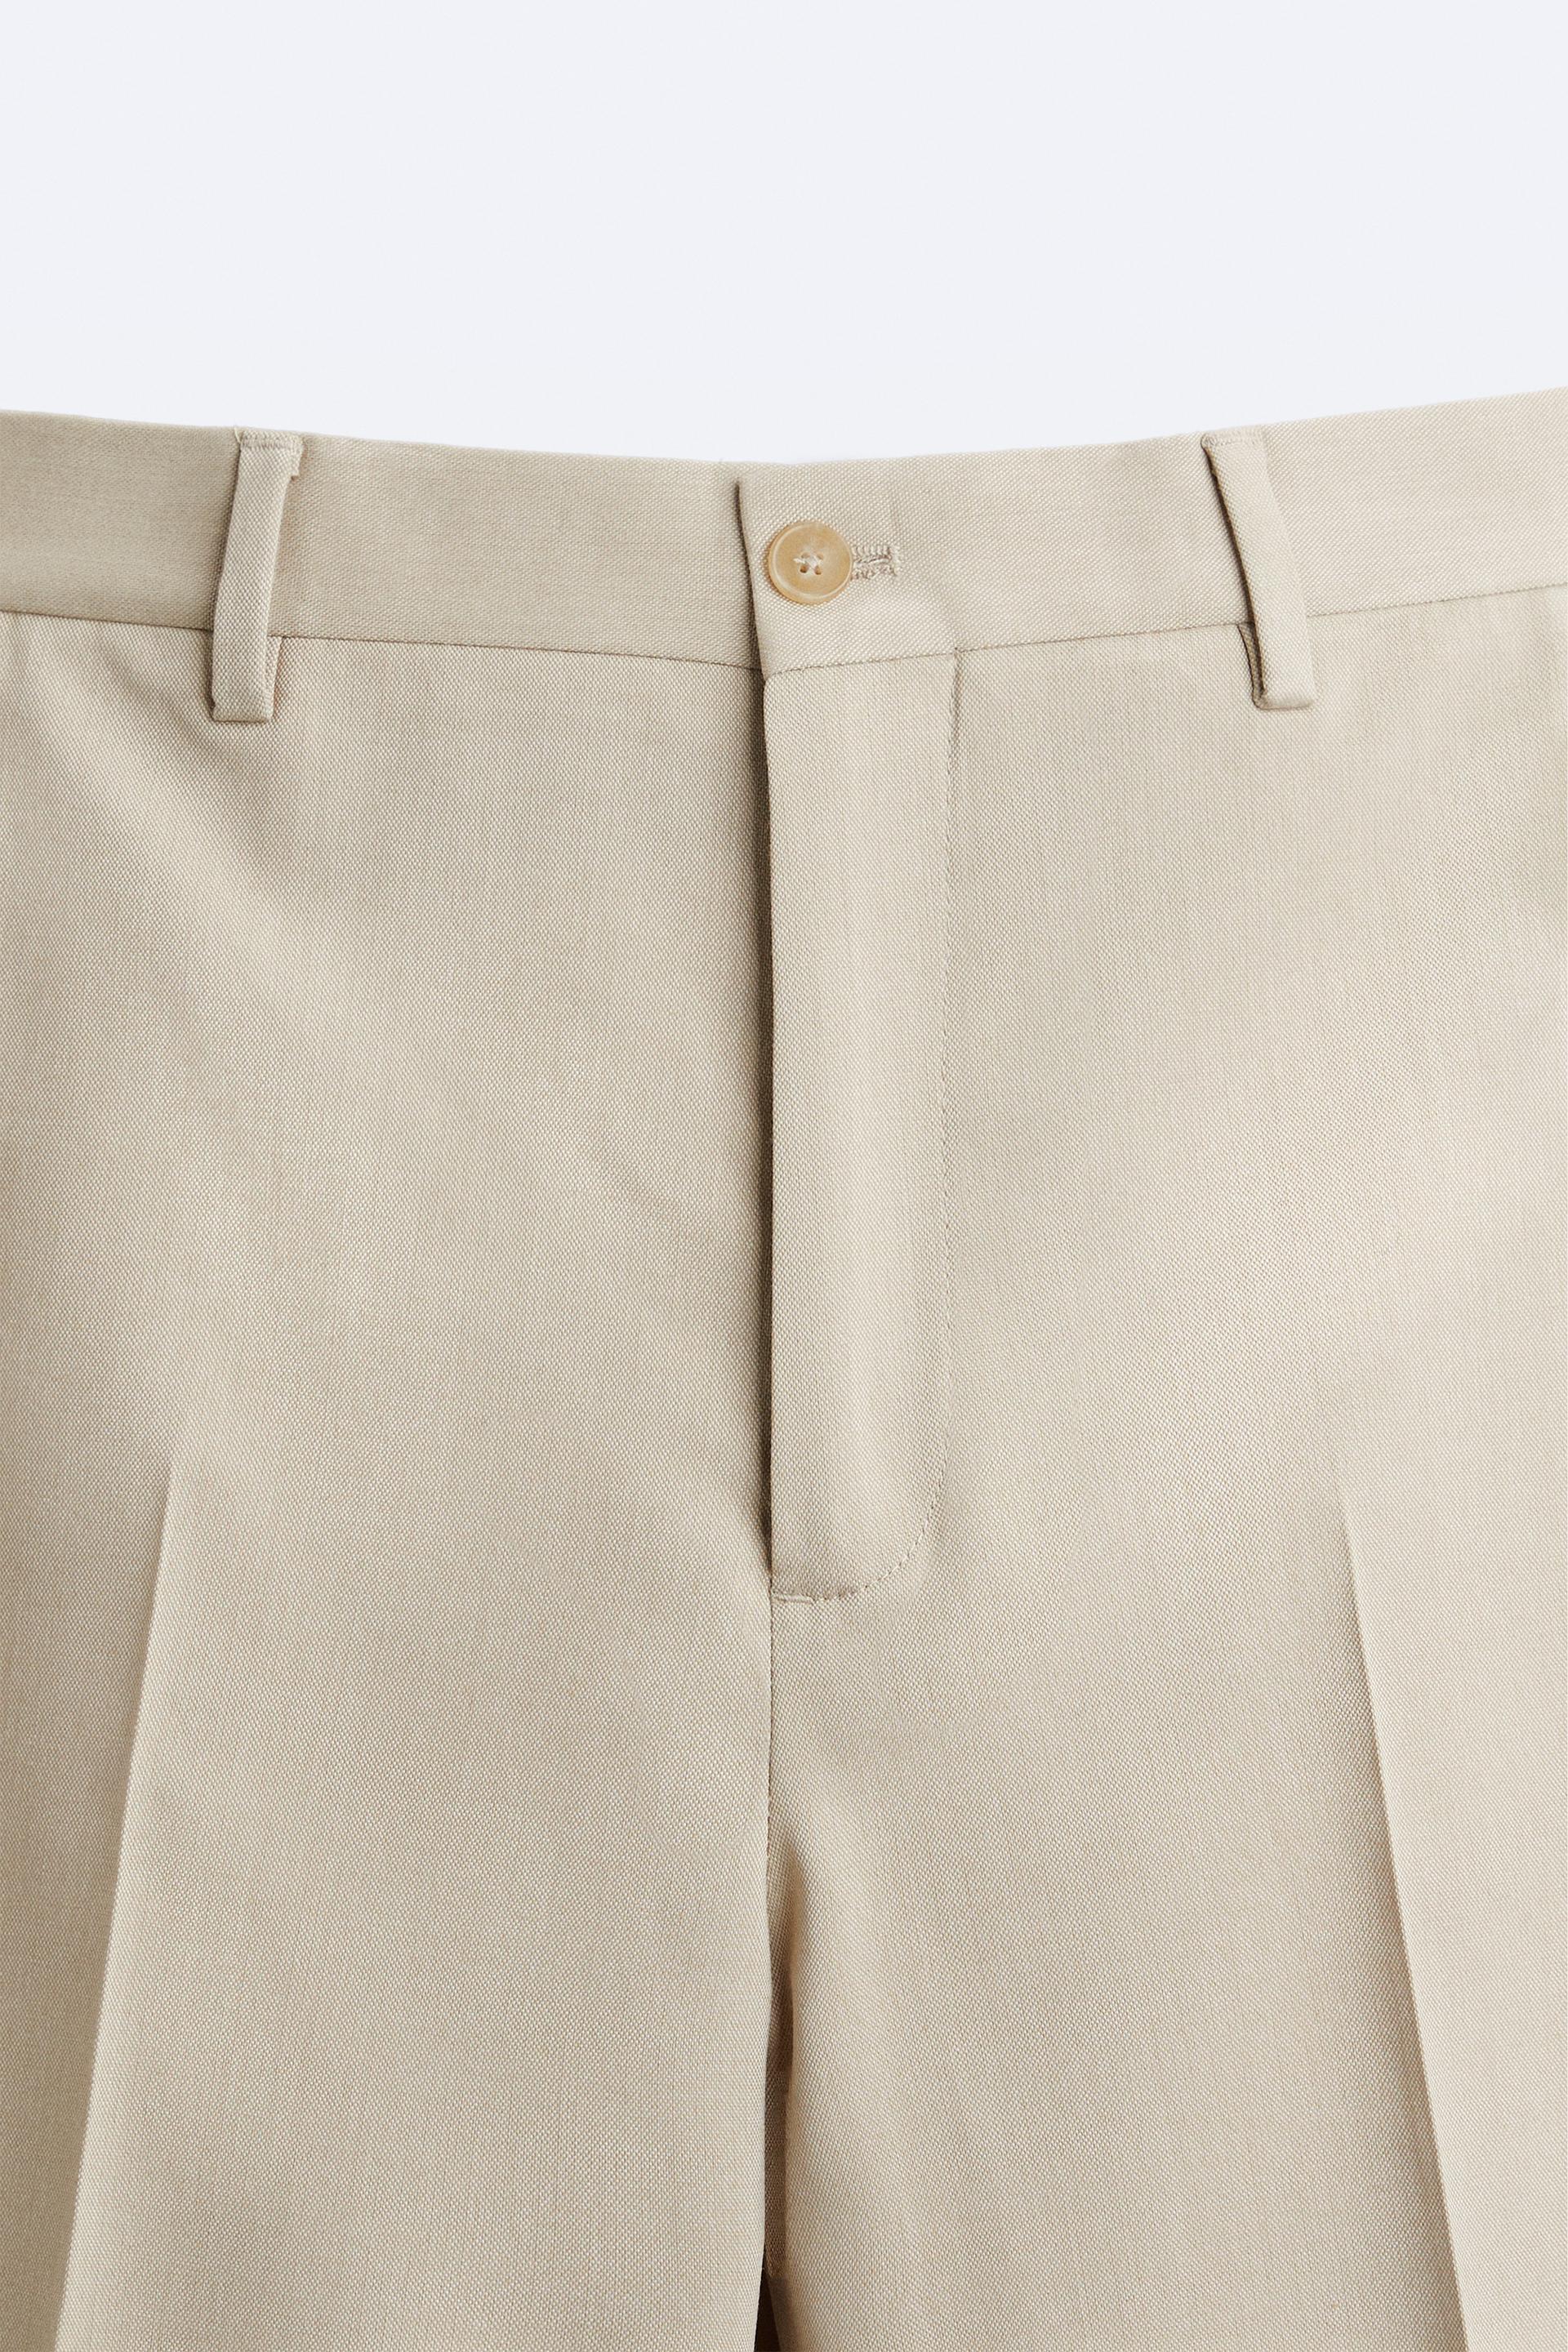 ZARA 'Skinny Stretch Chino' Men's Casual Pants 31 Taupe Brown 6786/310  **NWT**